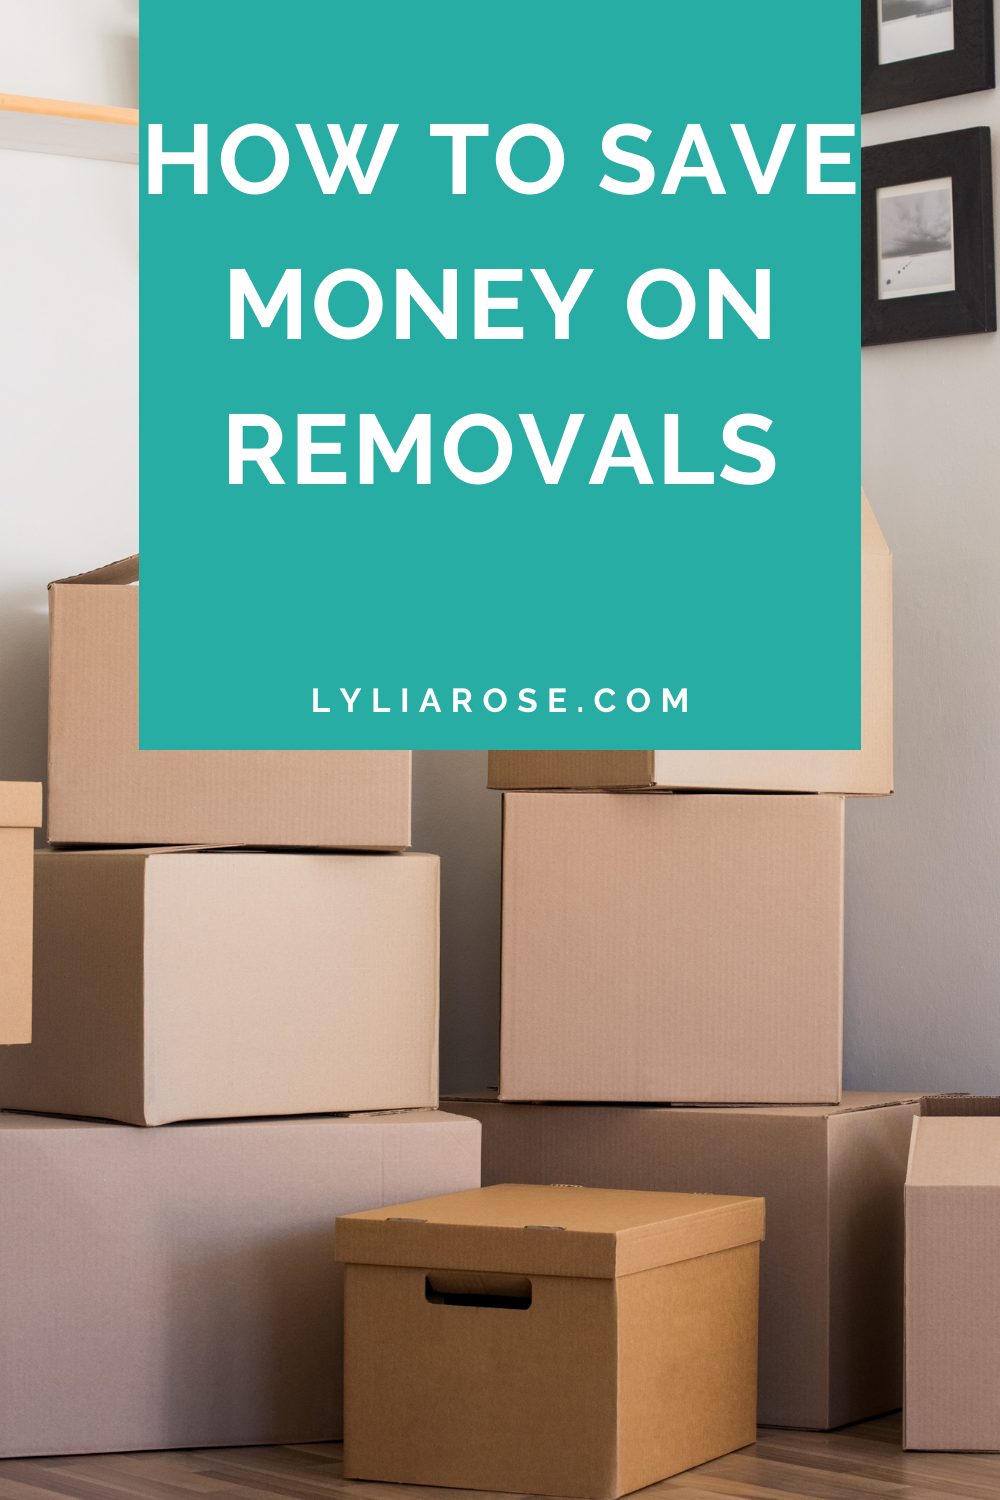 How can I save money on removals